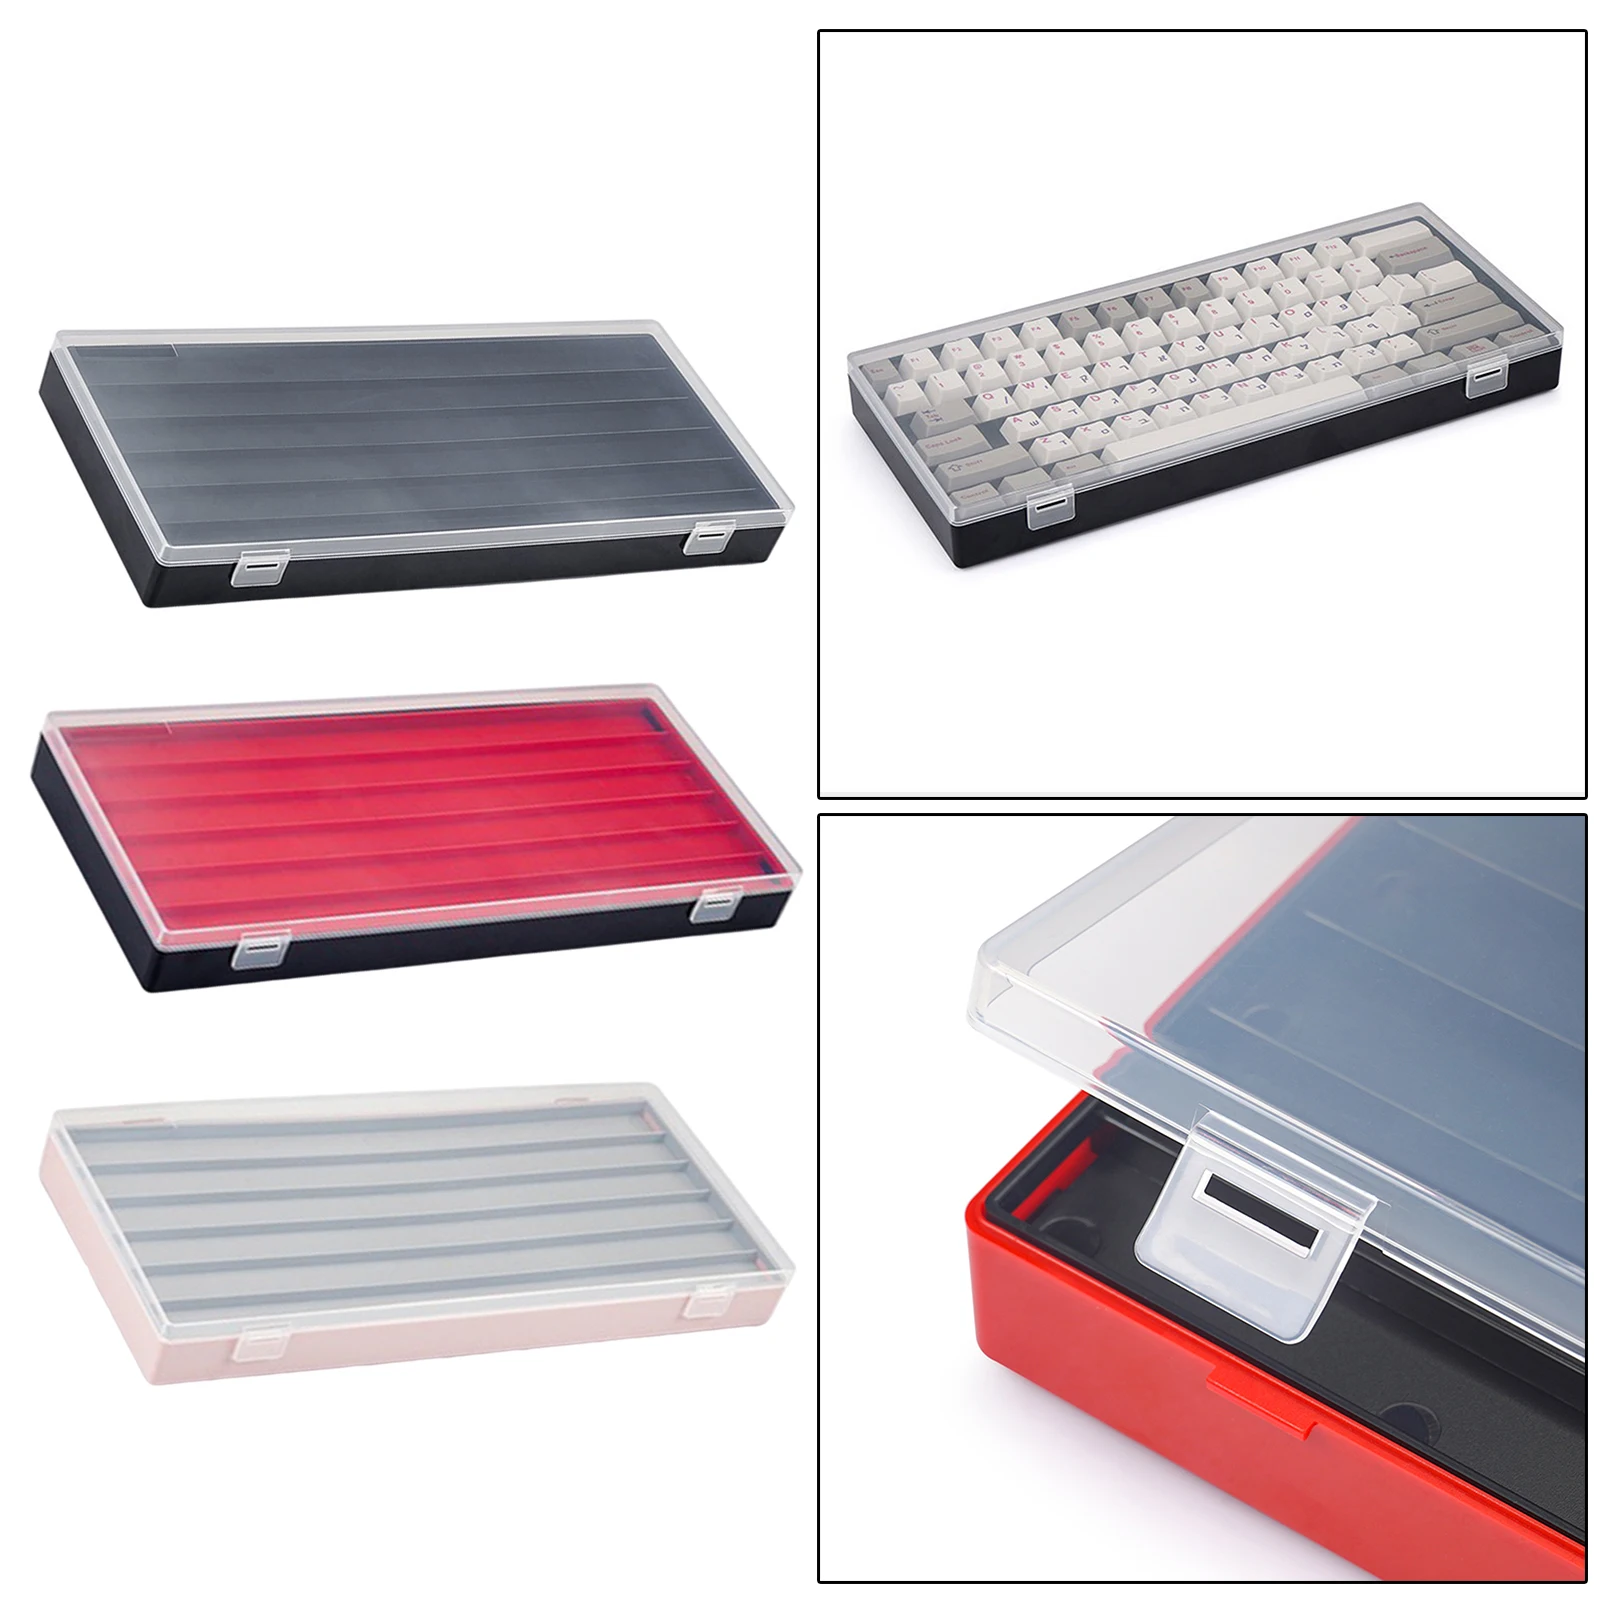 ABS Plastic Keycaps Storage Box w/Clear Lids Dustproof Storage Containers